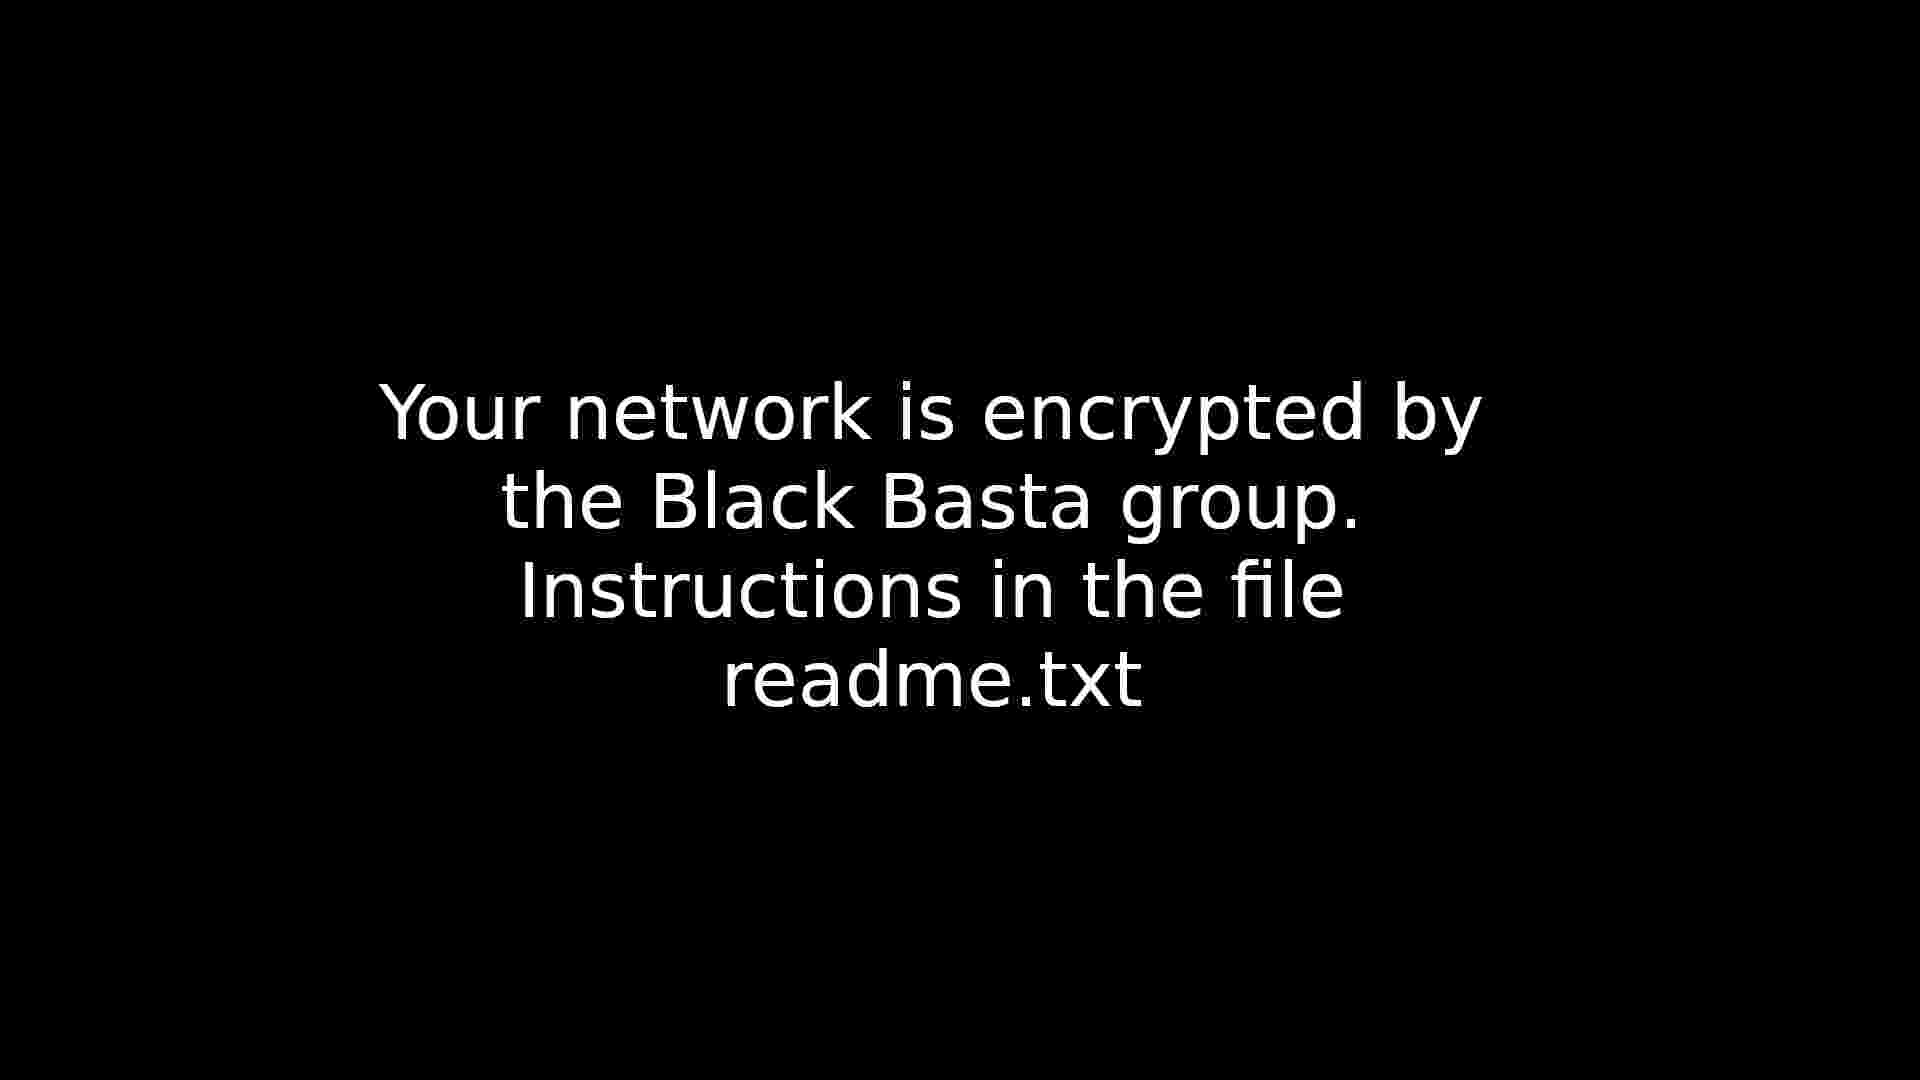 https://prod-author.we.trendmicro.com/assetdetails.html/content/dam/trendmicro/global/ja/research/22/f/examining-the-black-basta-ransomwares-infection-routine/image04.jpg